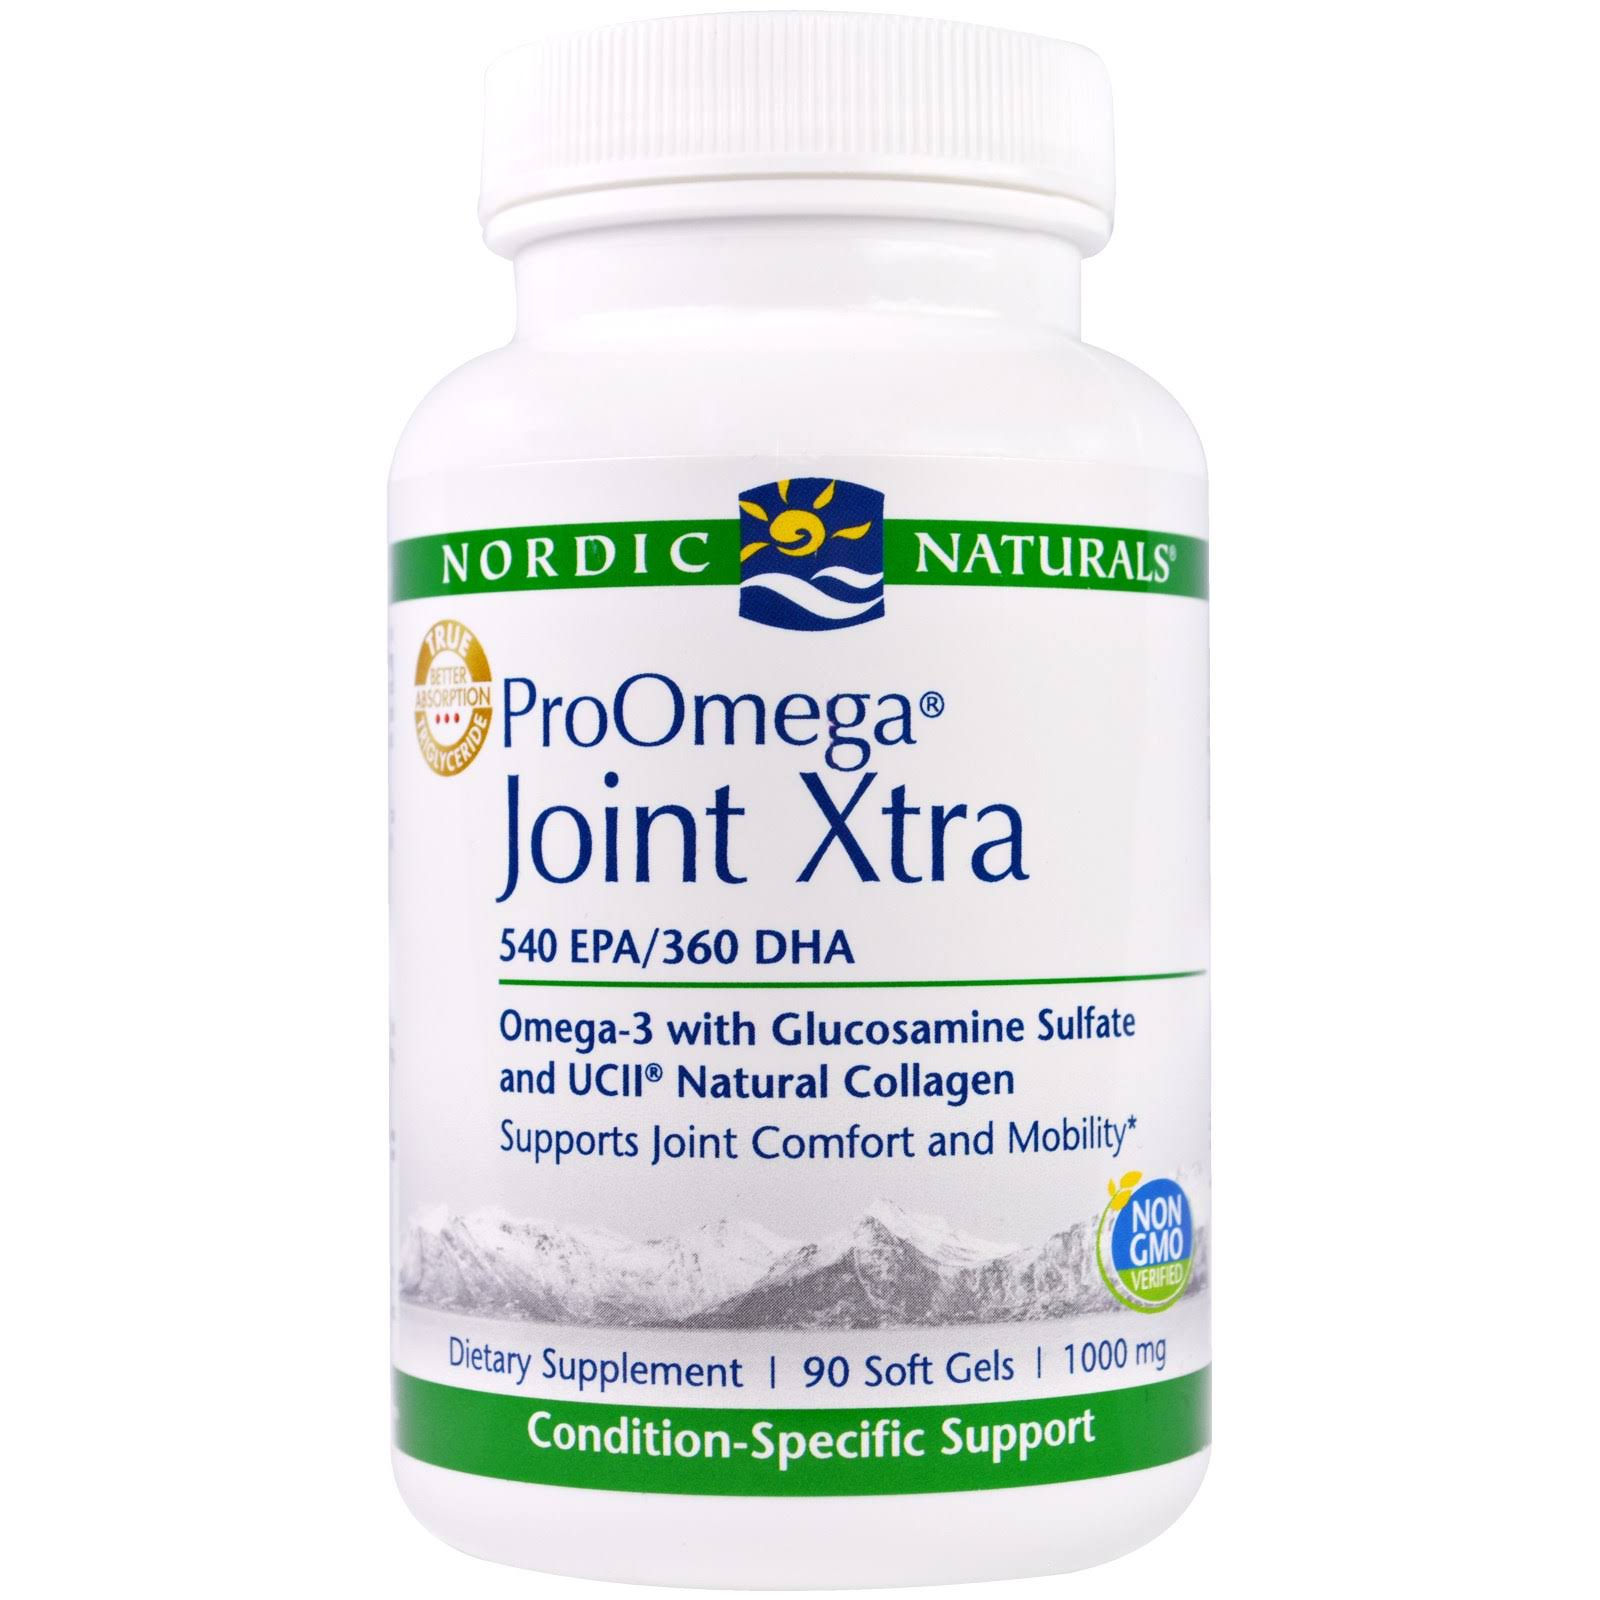 Nordic Naturals Pro Omega Joint Xtra Soft Gels - 1000mg, 90ct